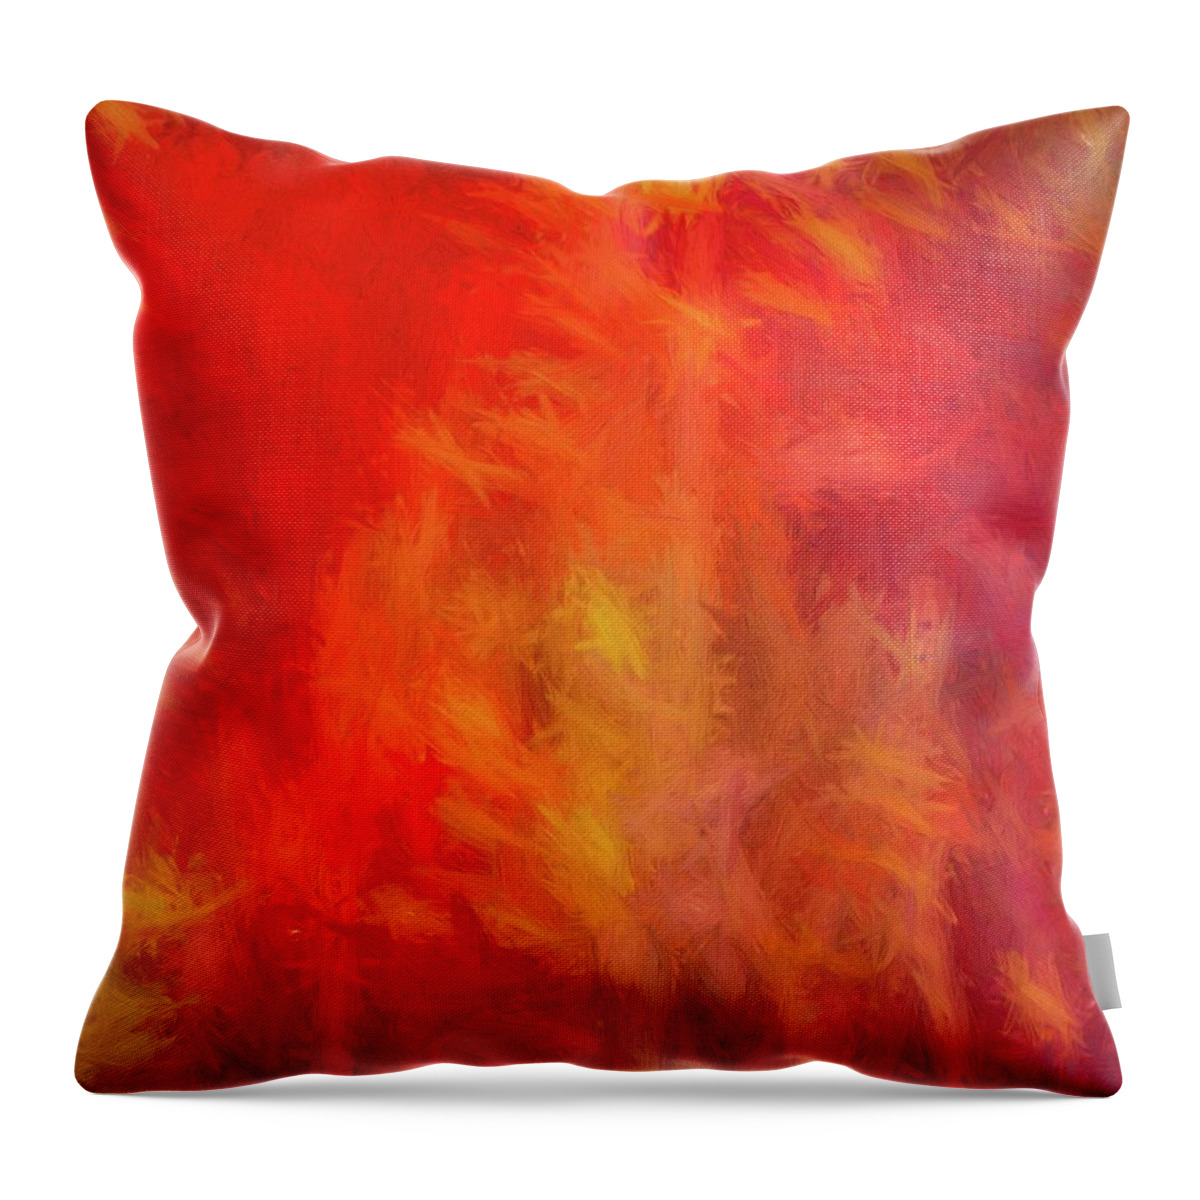 Abstract Throw Pillow featuring the digital art Red Abstract by Steve DaPonte